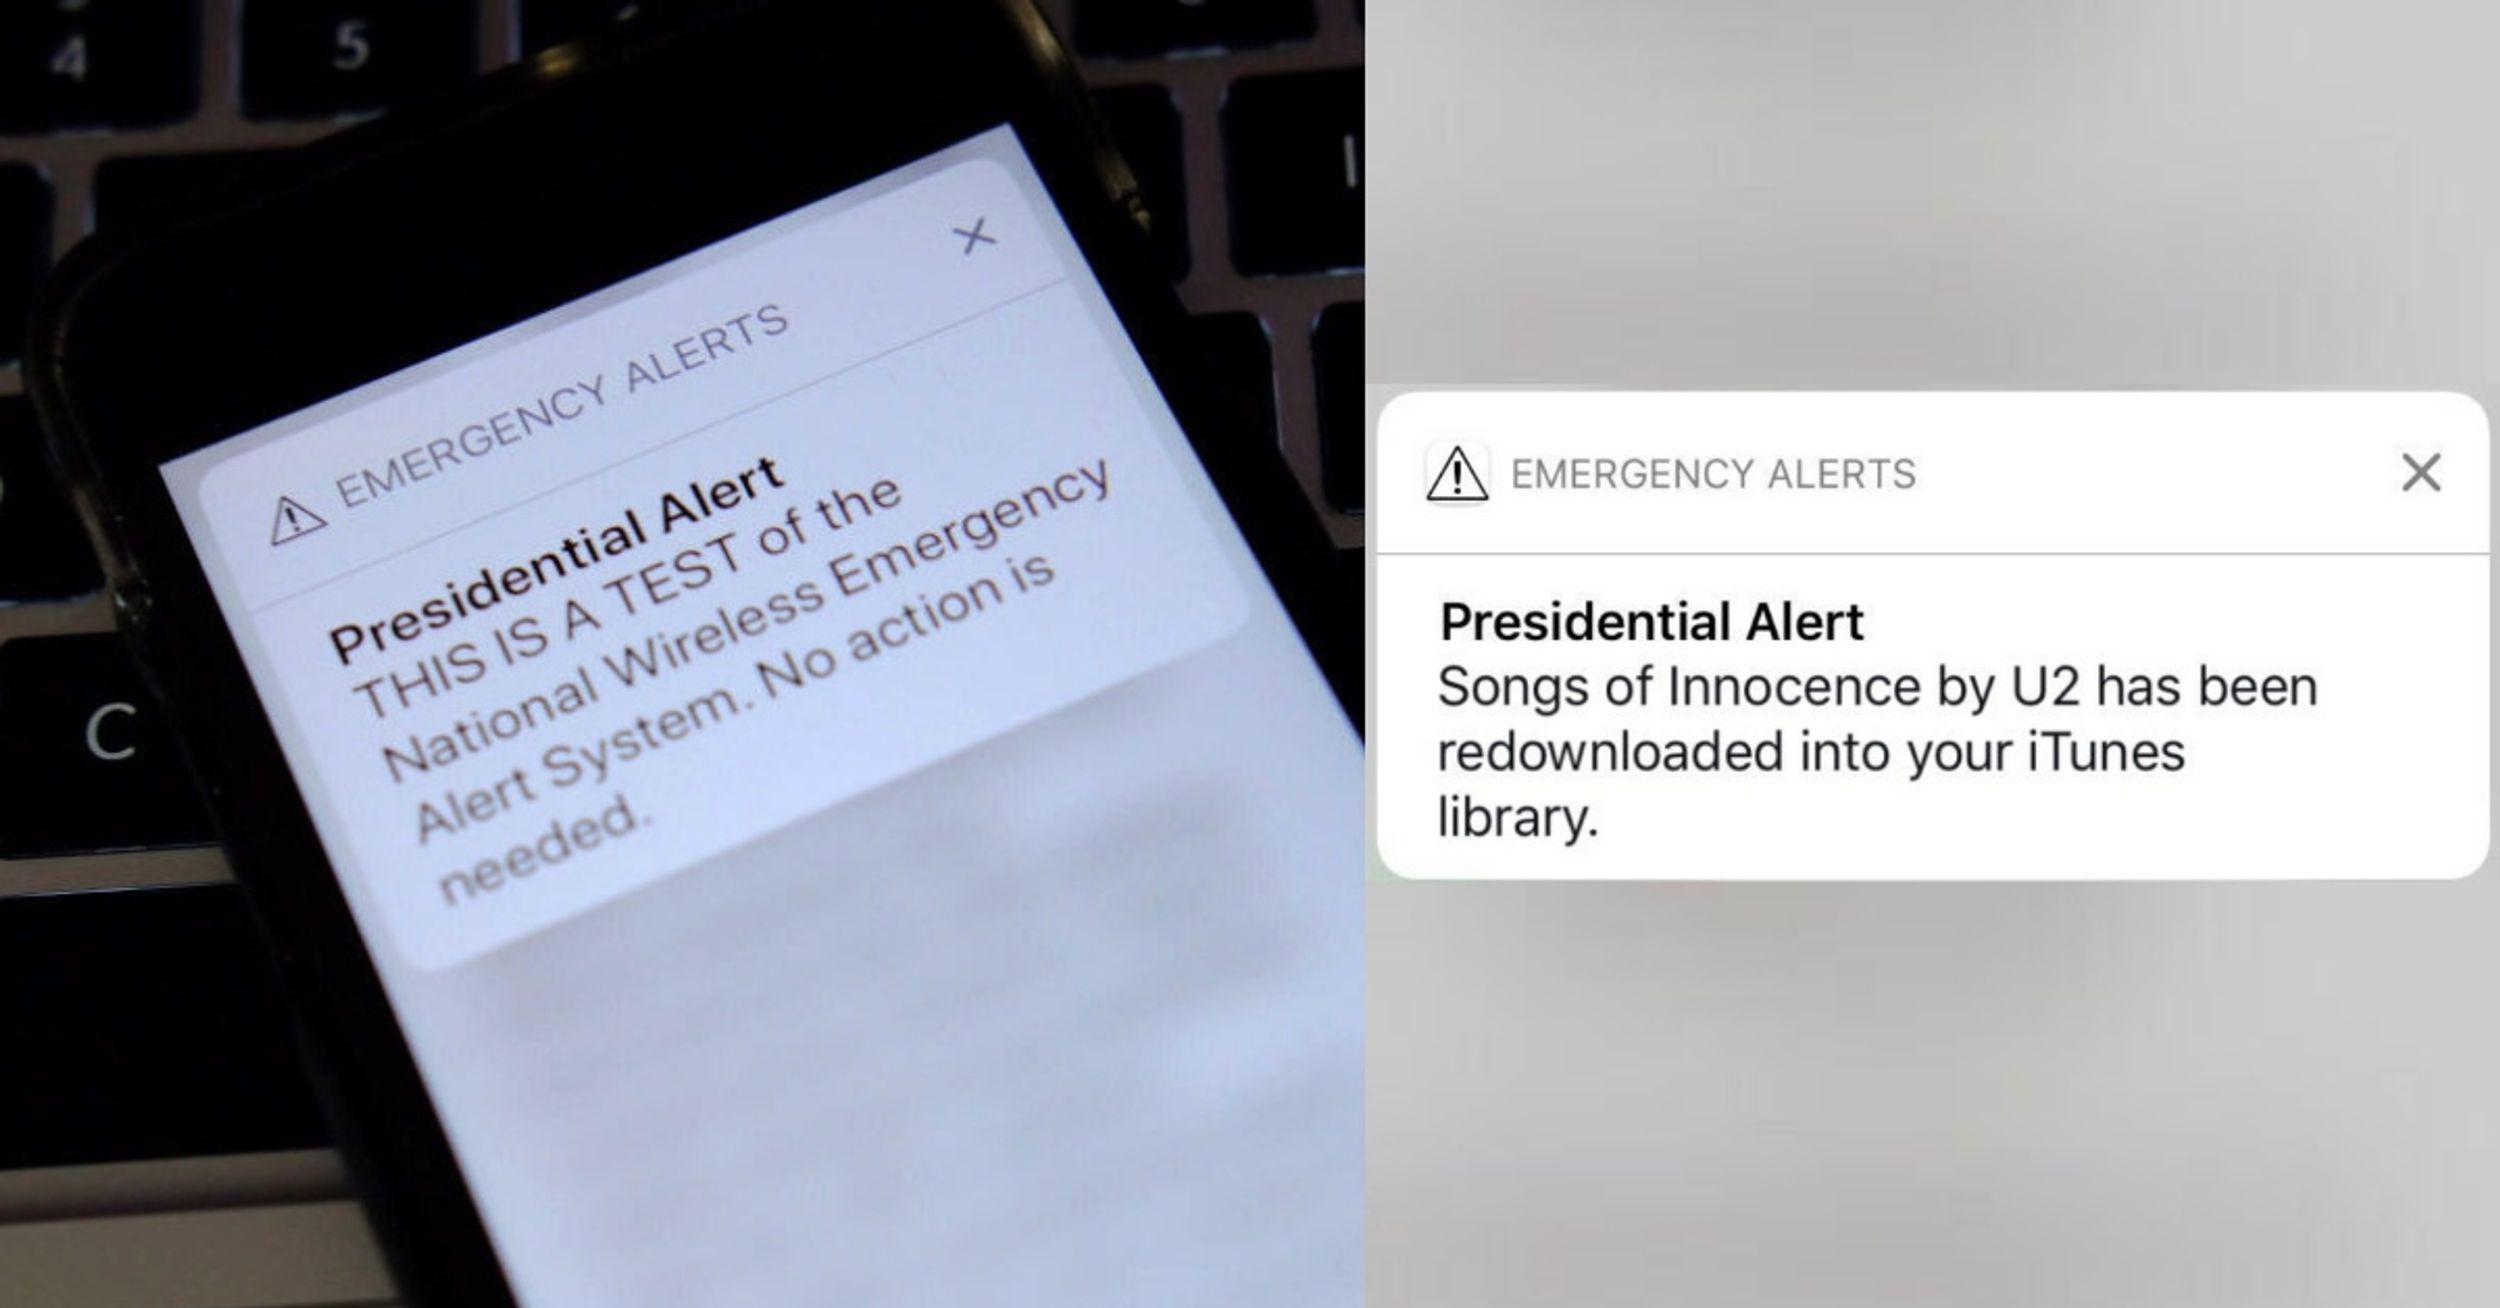 That Mass Presidential Text Alert Was Prime Fodder For Some Epic Jokes 😂